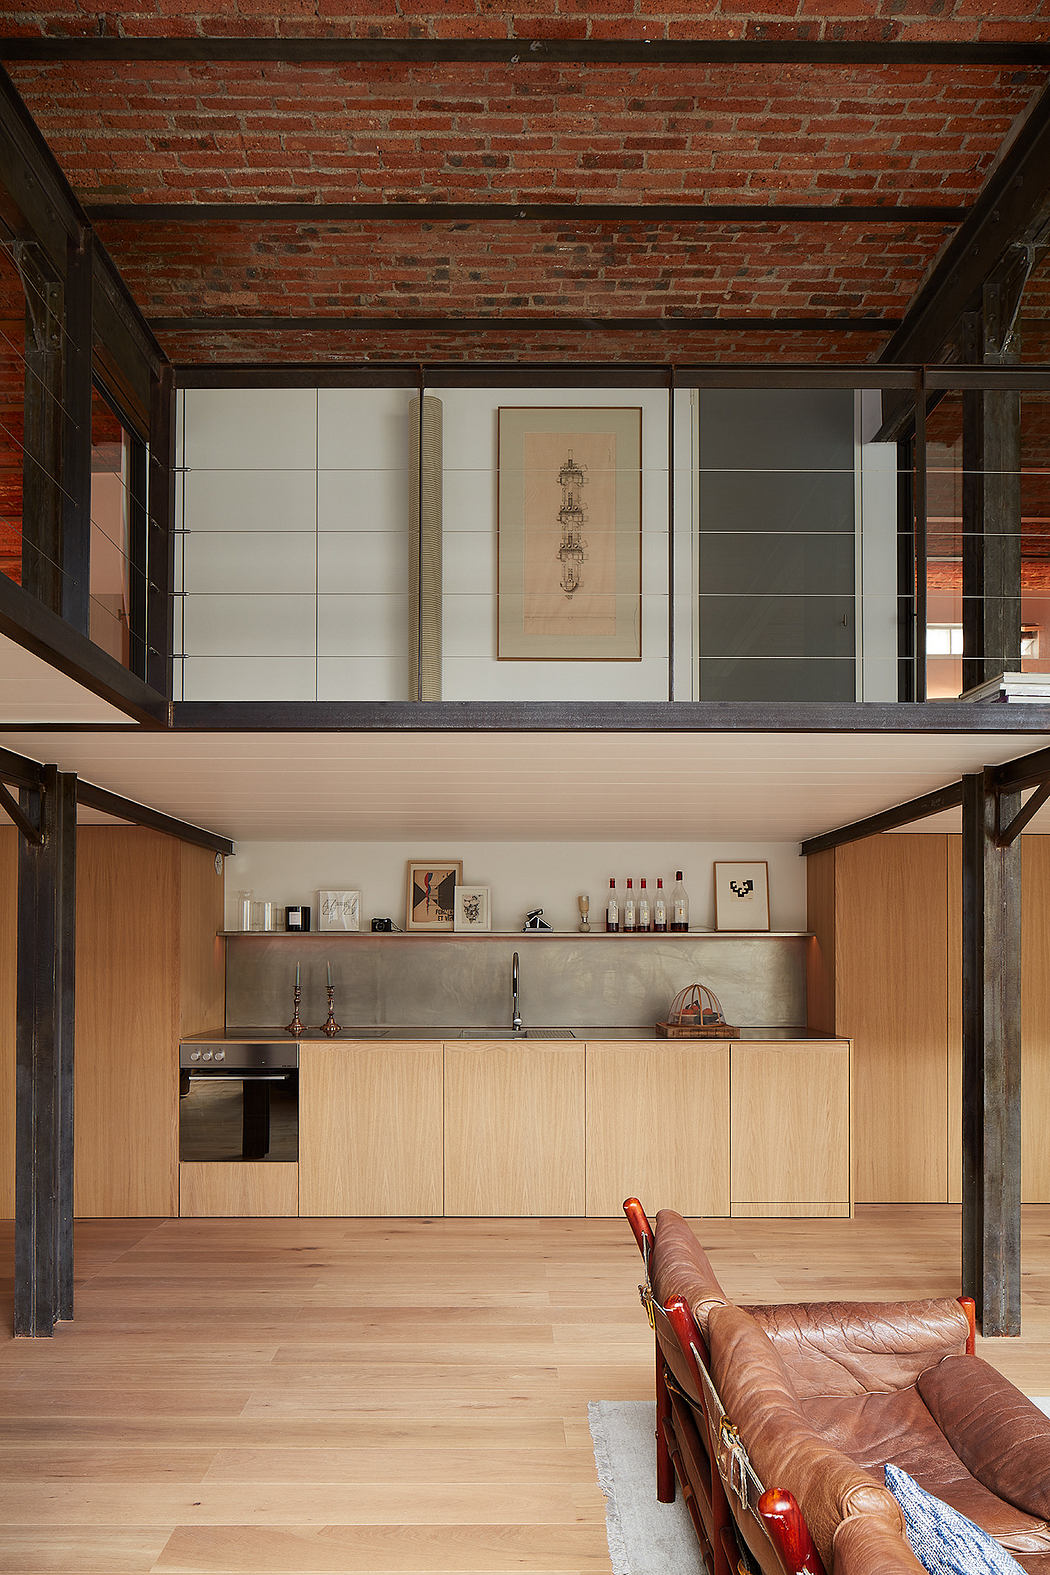 Modern loft interior with exposed brick, wooden floors, and a sleek kitchen.